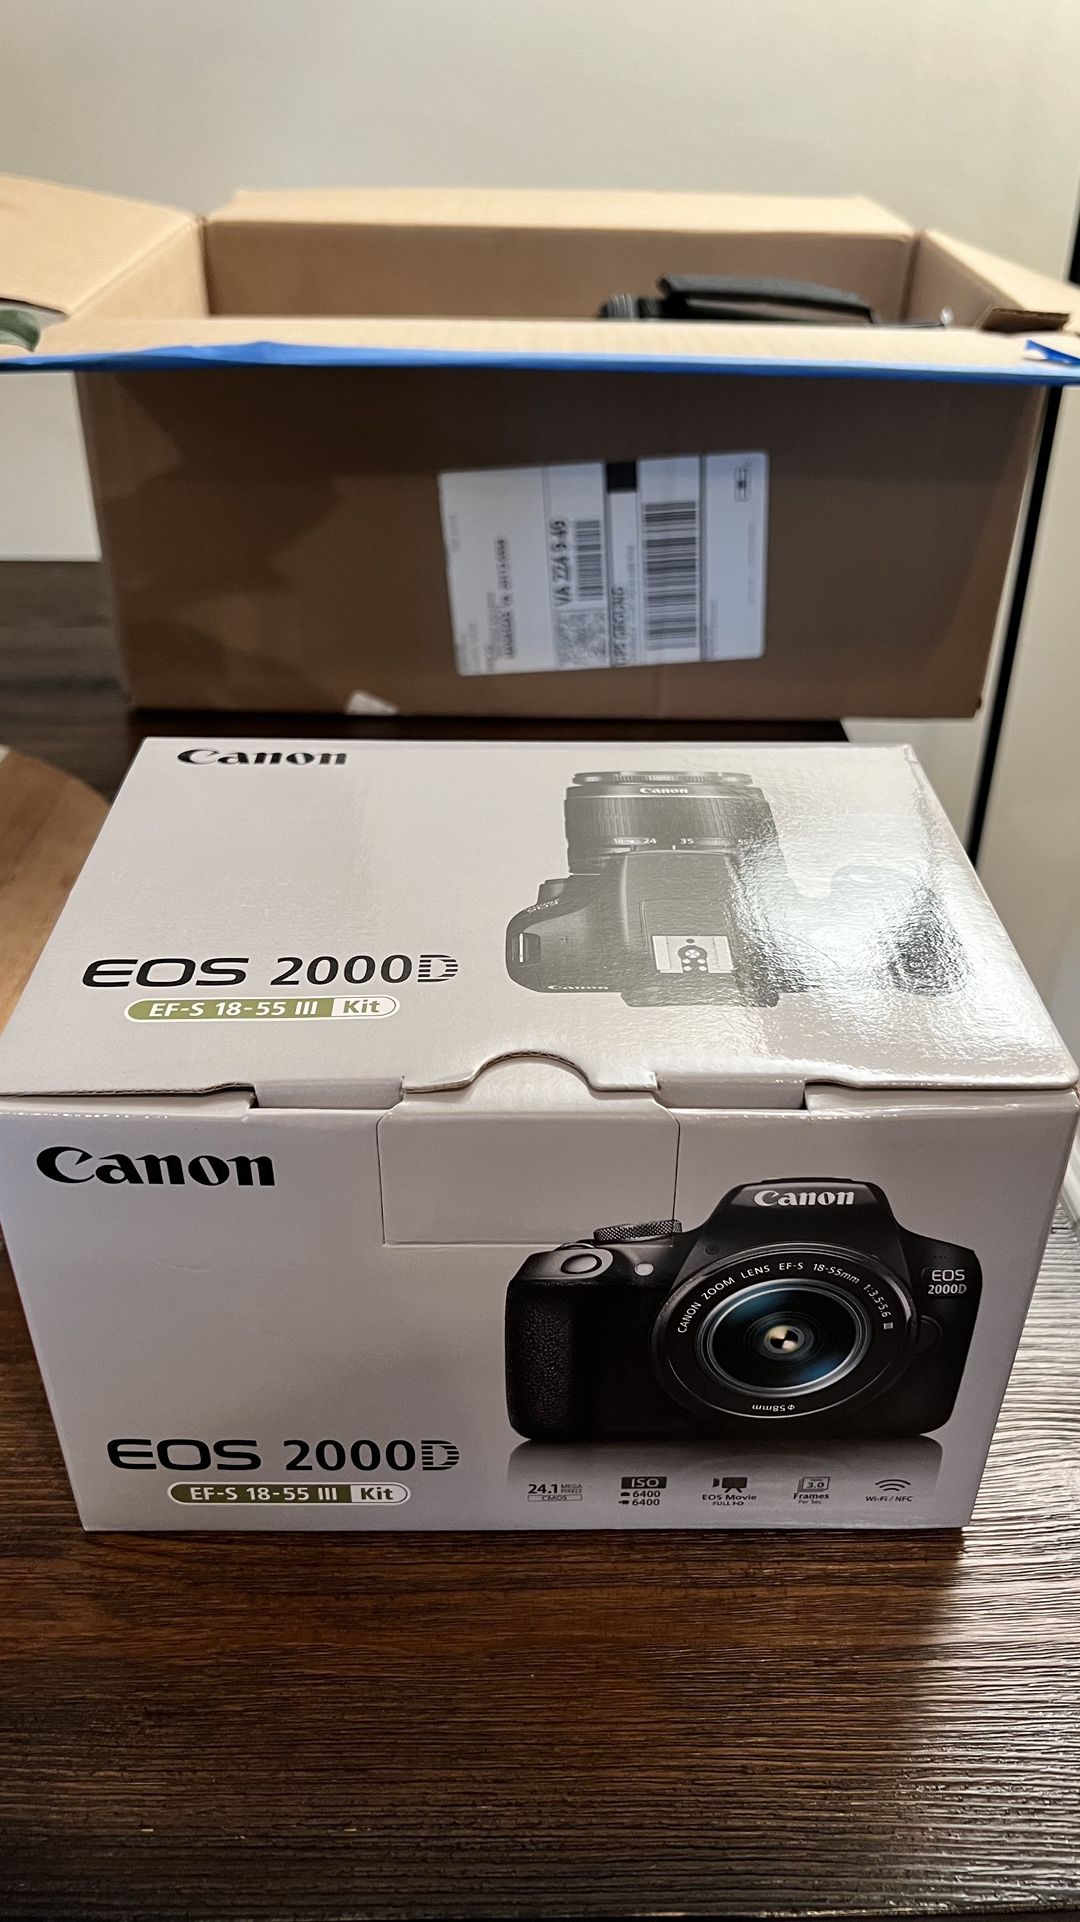 Canon EOS 2000D (Rebel T7) camera with accessories bundle